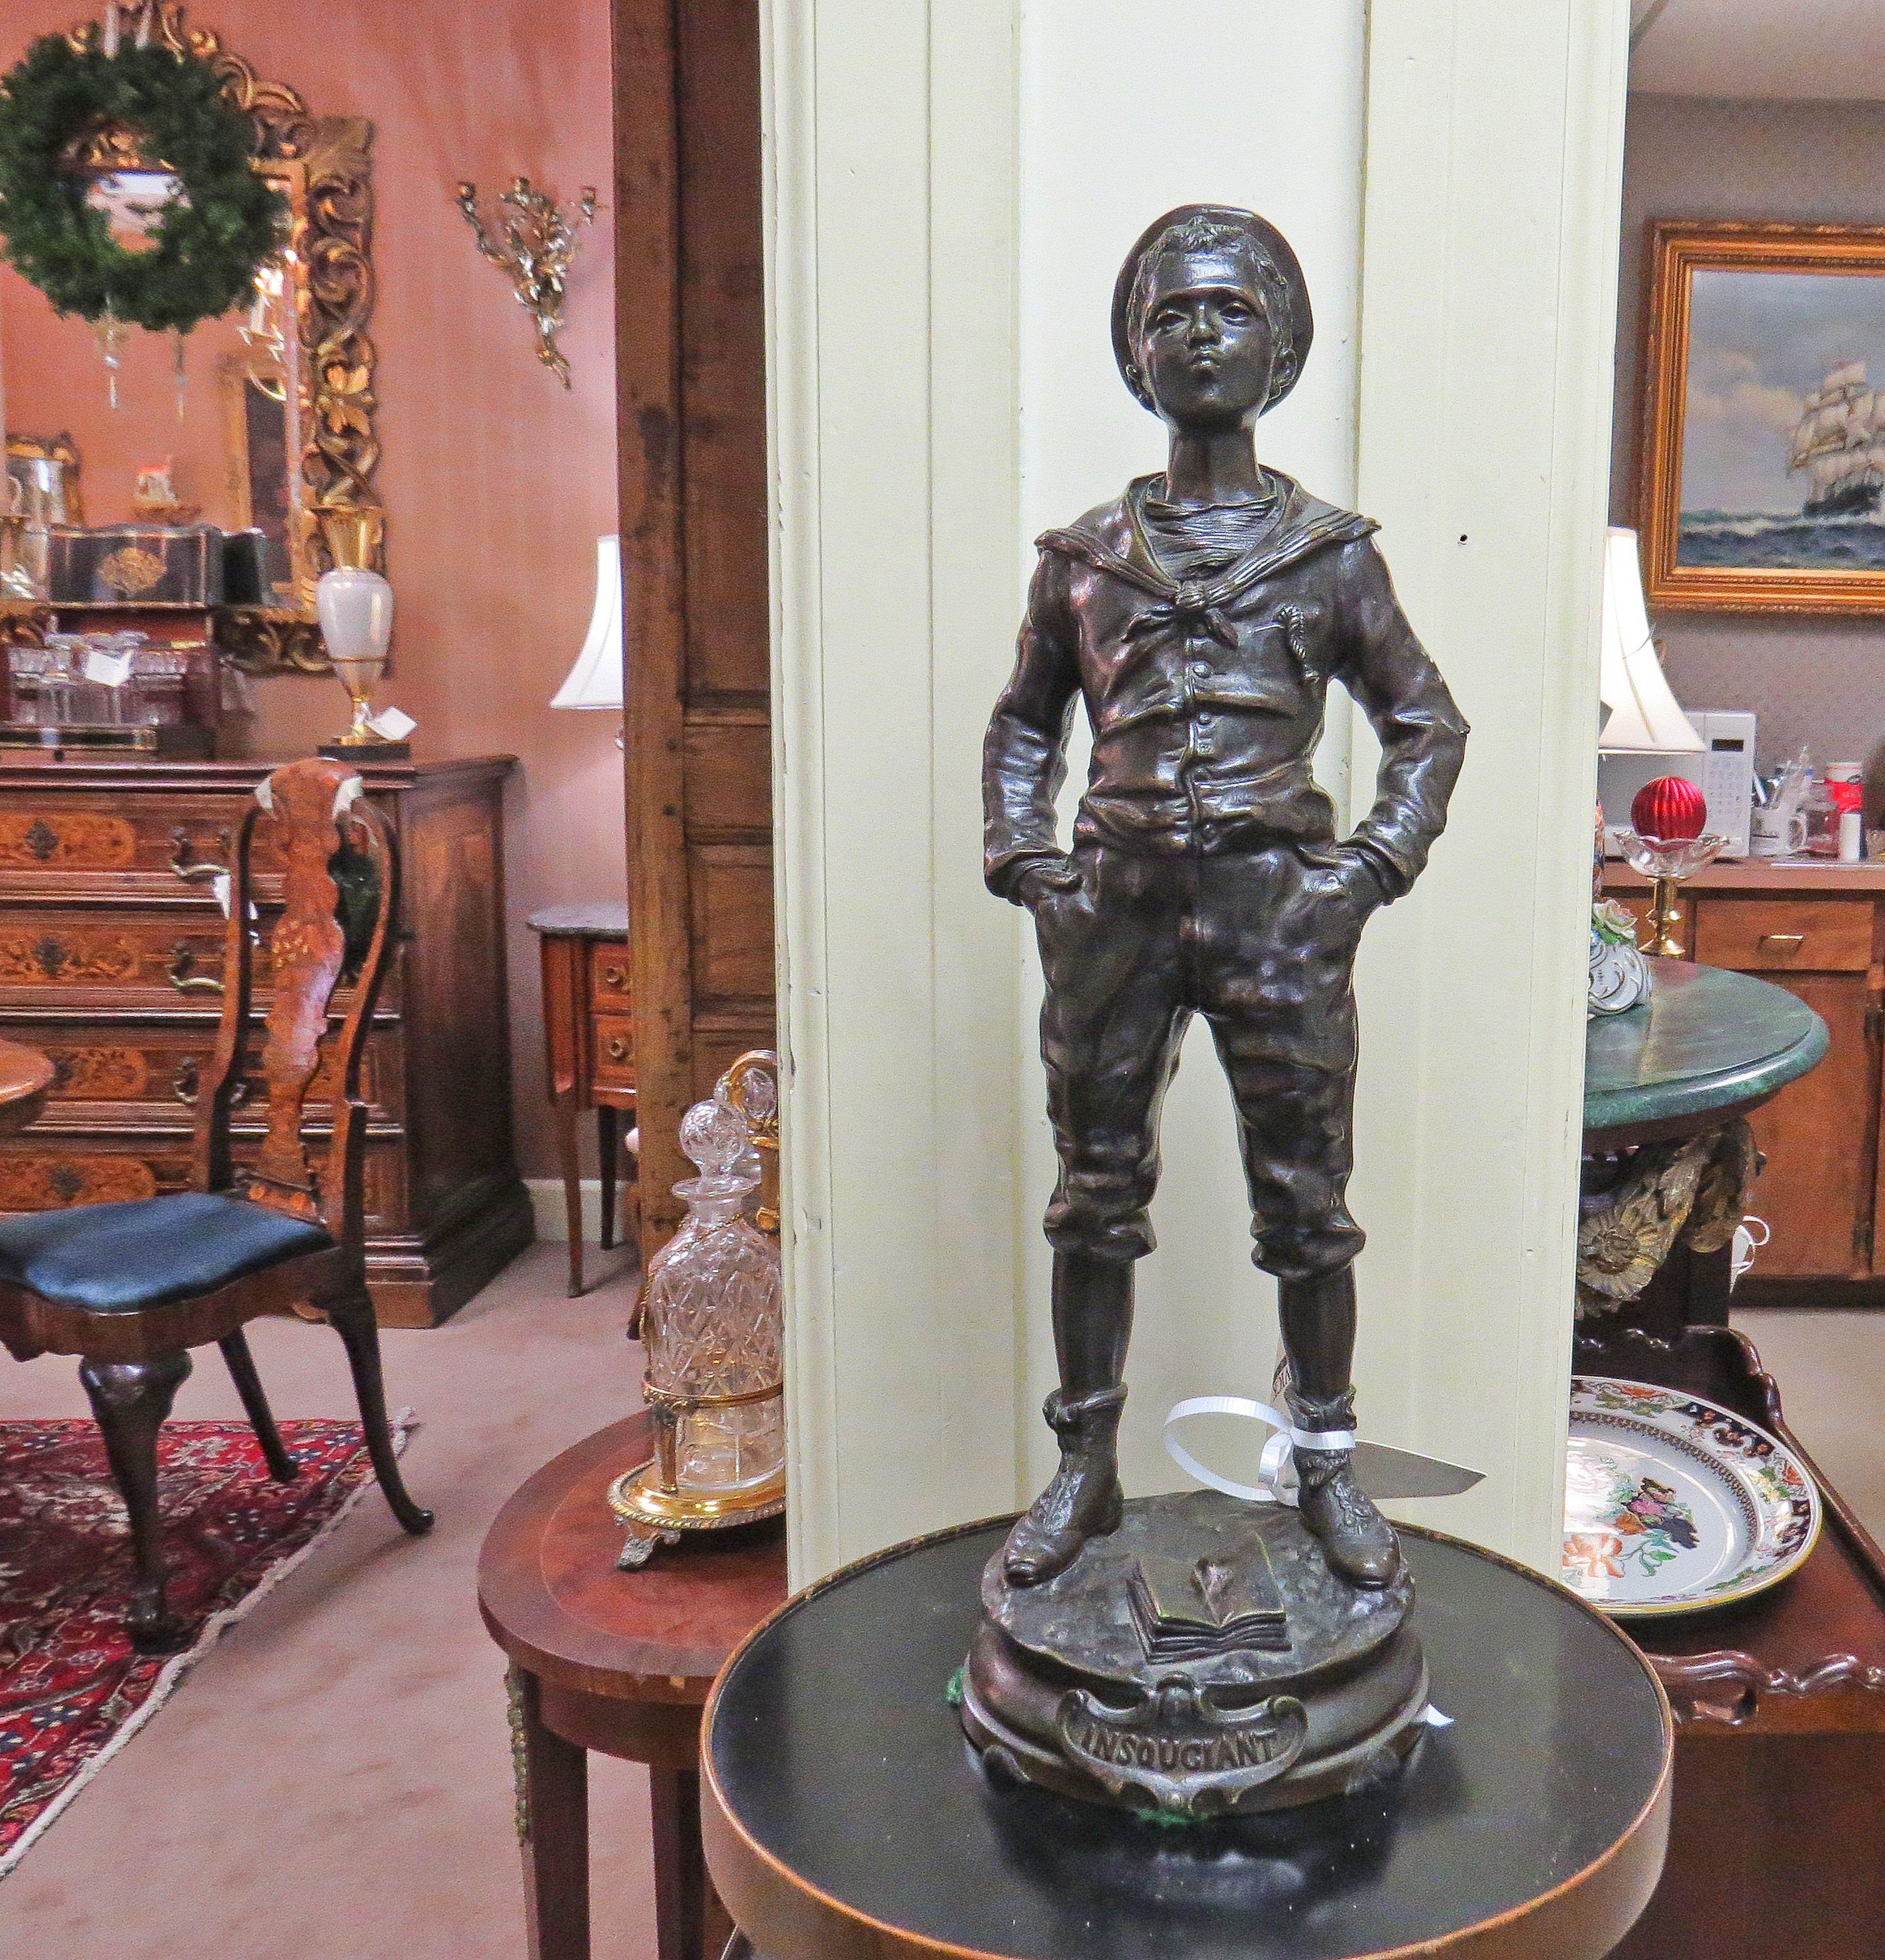 French Bronze Young Boy Entitled “Insouciant” or “Carefree”; Signed C. Anfrie (1833-1905)